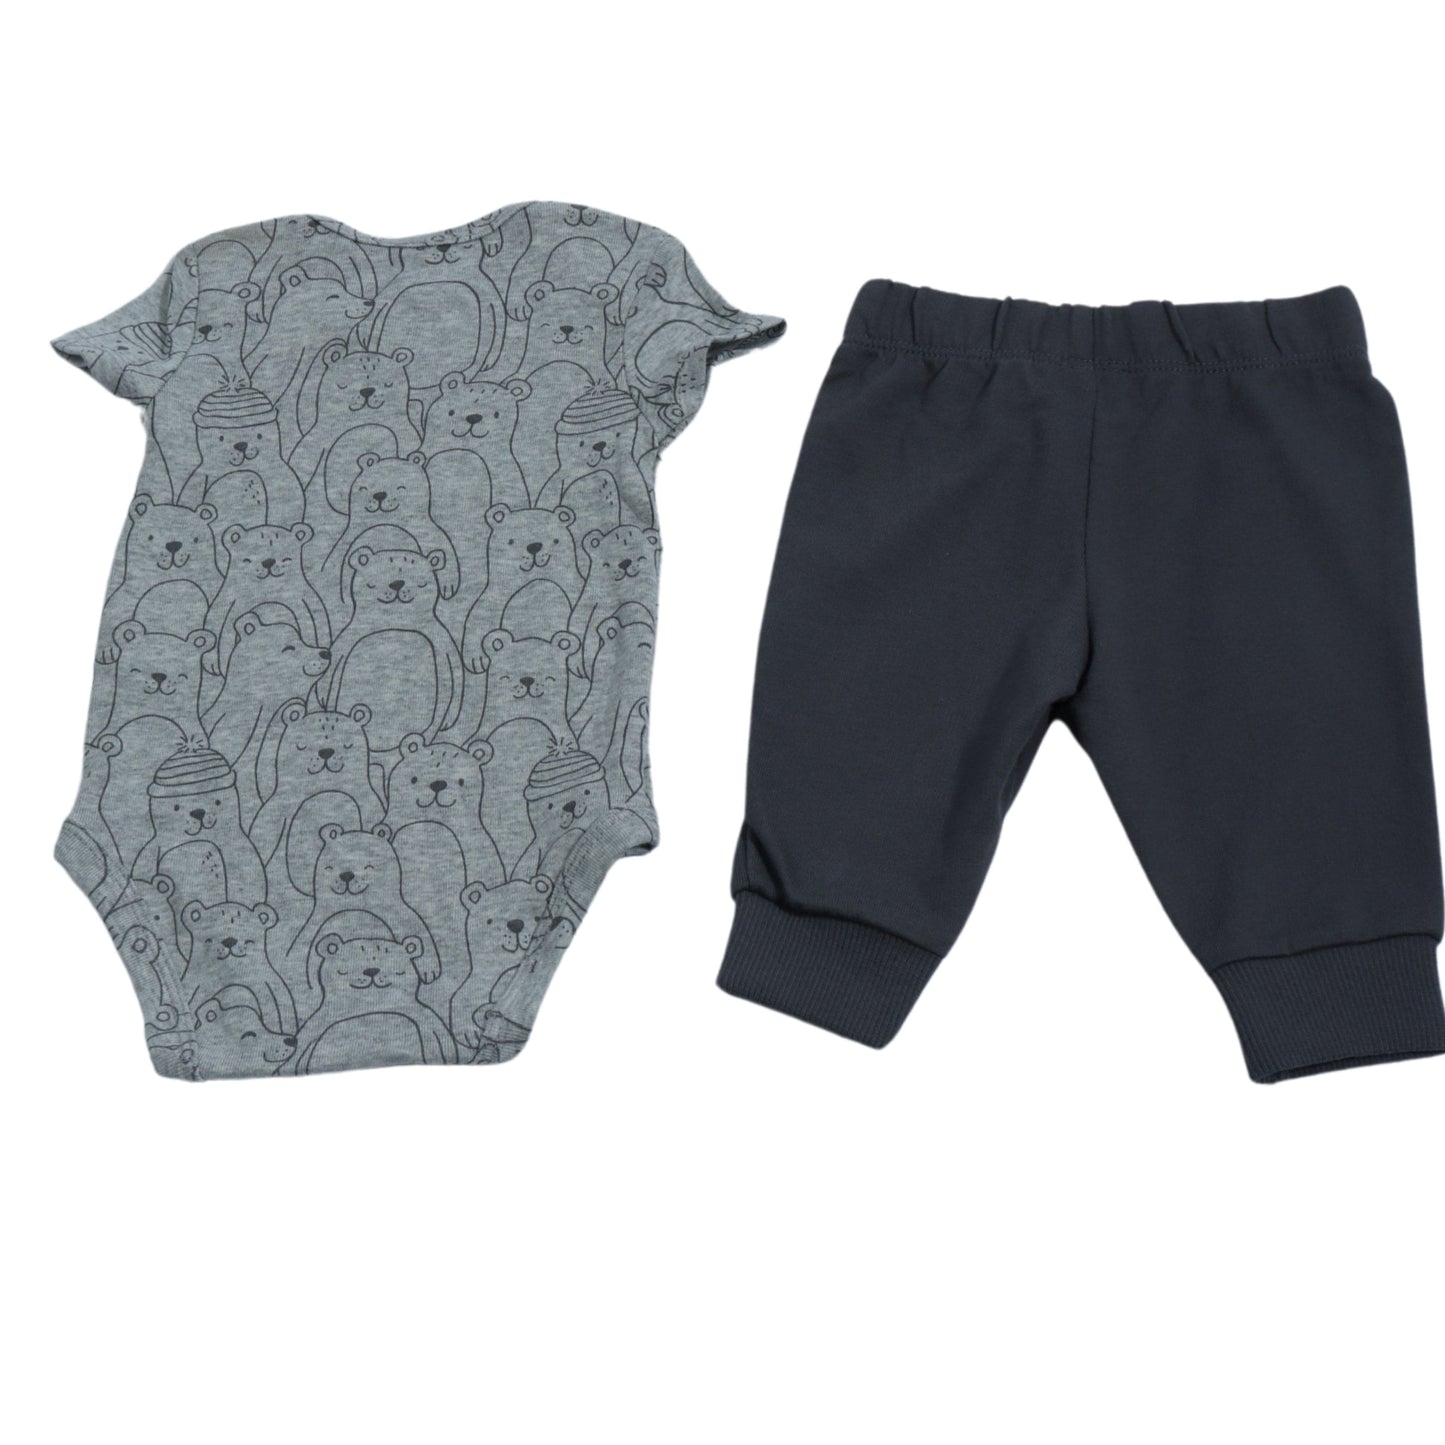 CARTER'S Baby Boy 3 Month / Grey CARTER'S - BABY - Bear Bodysuit Pants Outfit